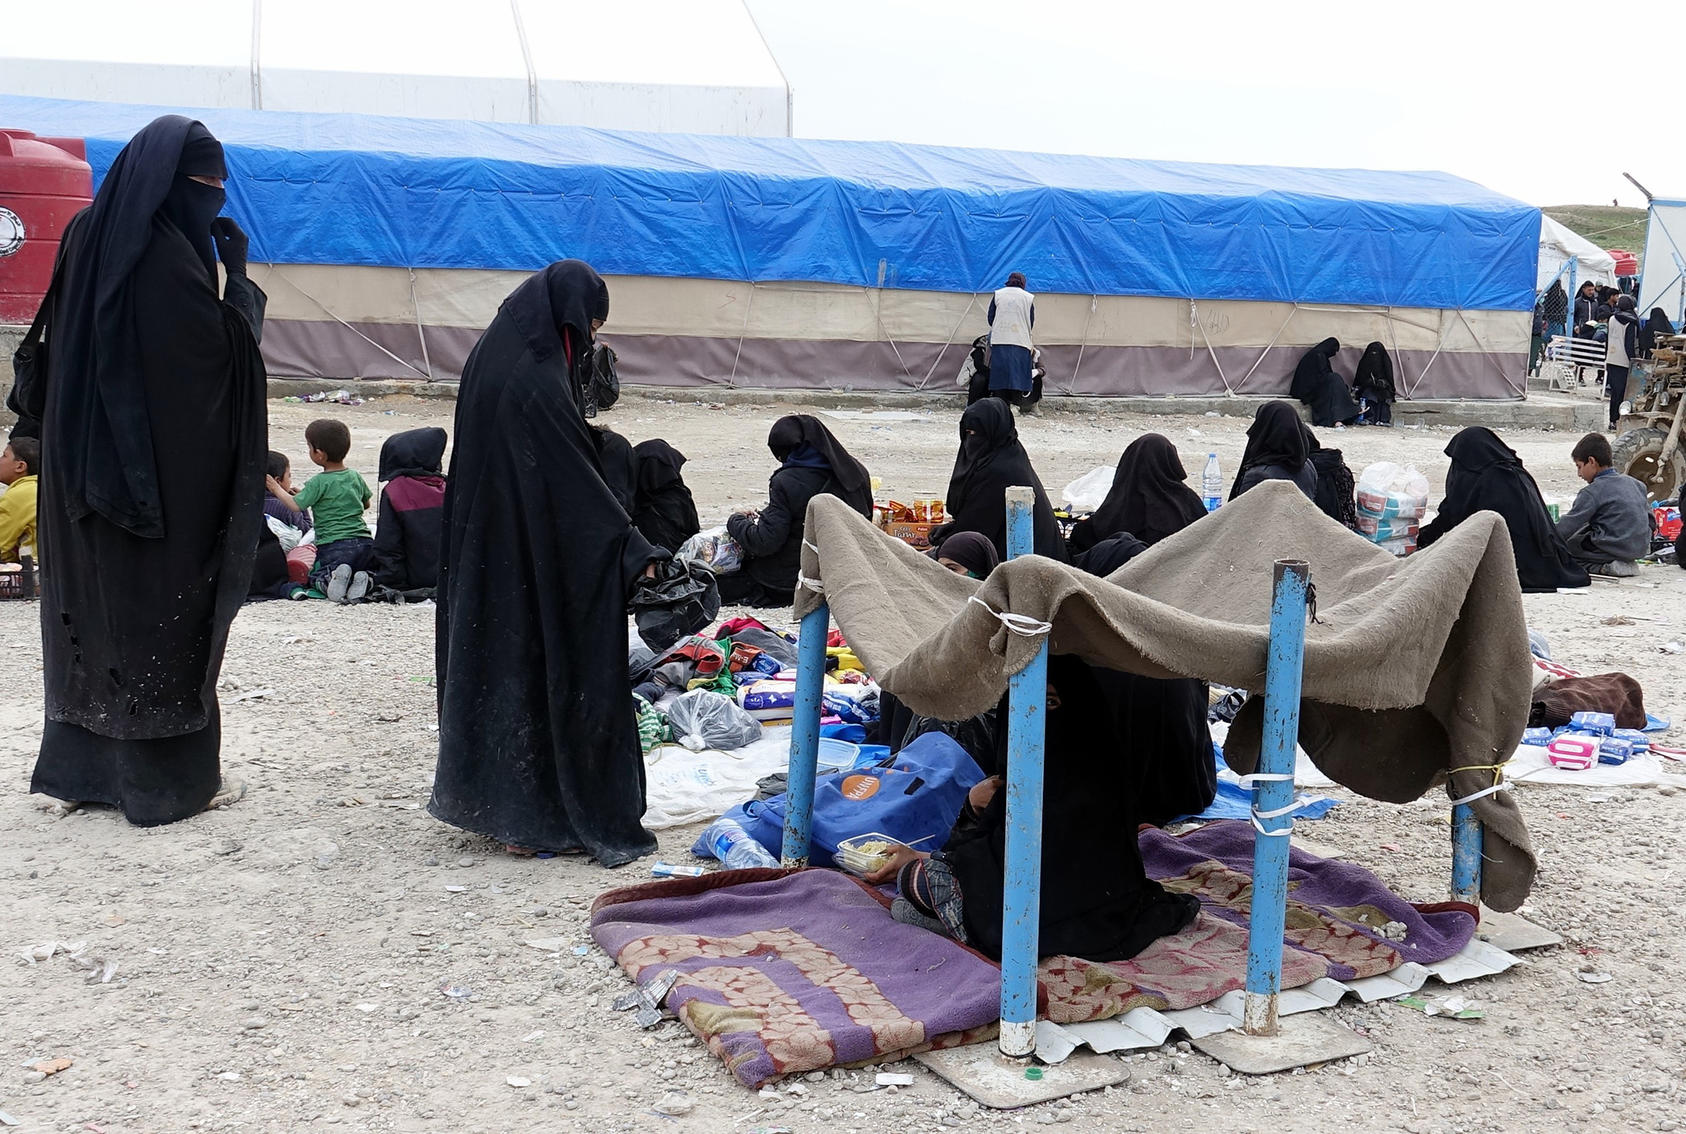 As the Islamic State “caliphate” collapsed in March, women and children of ISIS fighters’ families were gathered at a rudimentary detention camp in al-Hol. The camp now holds more than 70,000. (Photo credit: Robin Wright/USIP)